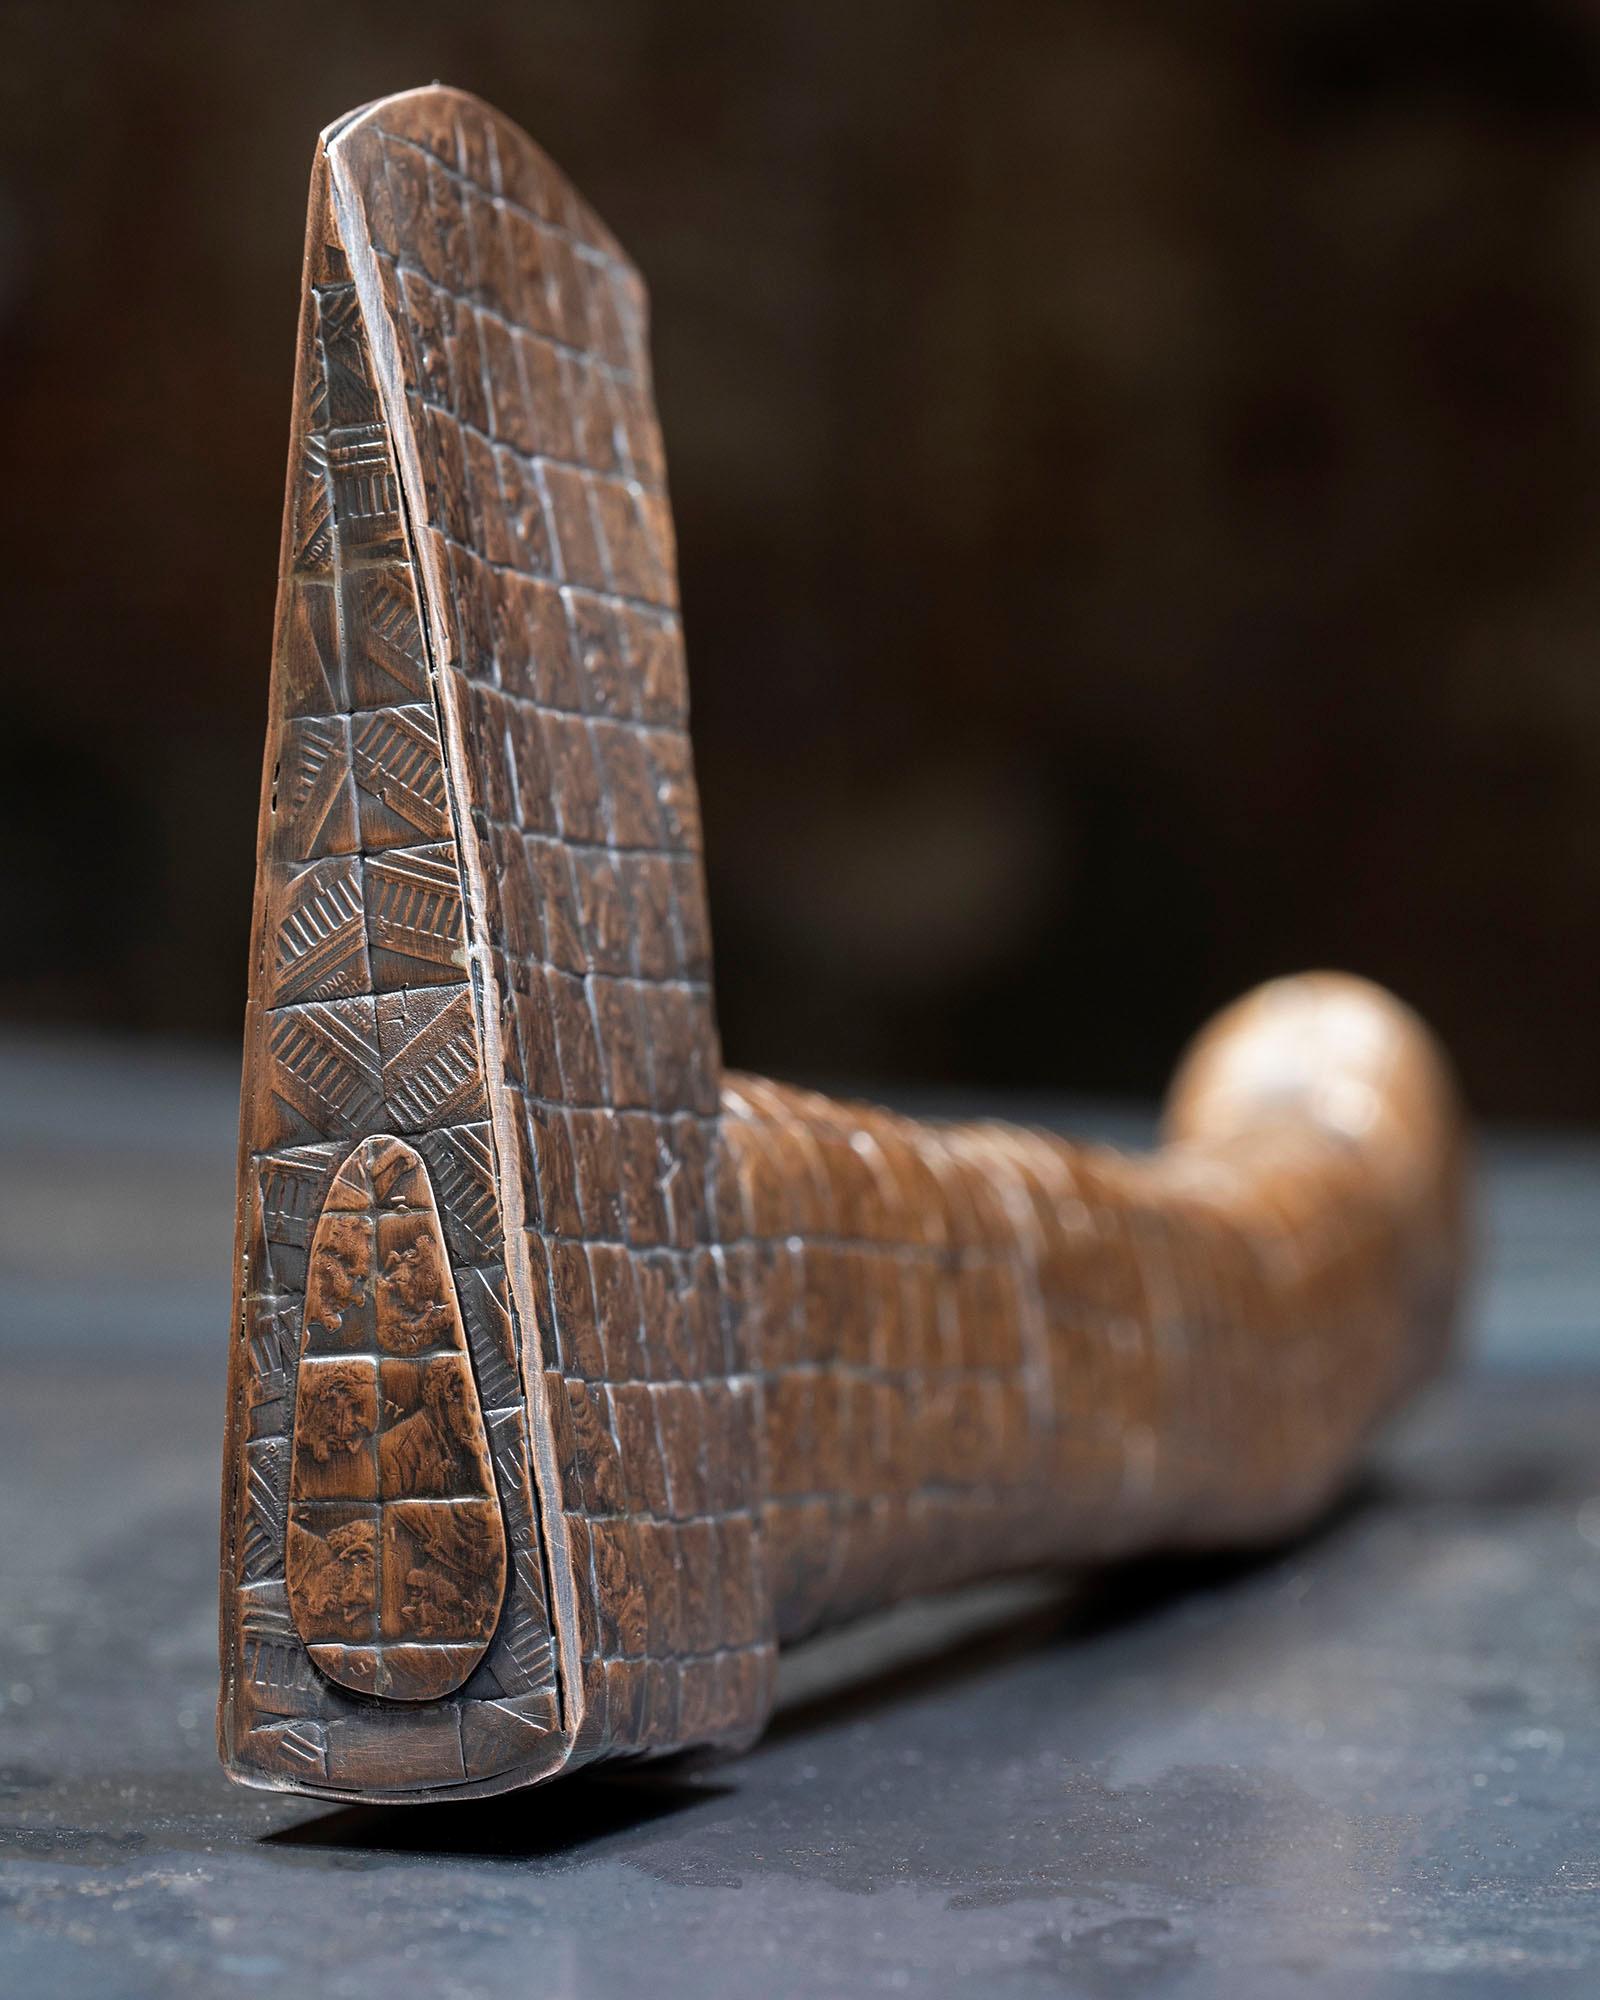 The Craftsman Series: Hatchet - Contemporary Sculpture by Stacey Lee Webber